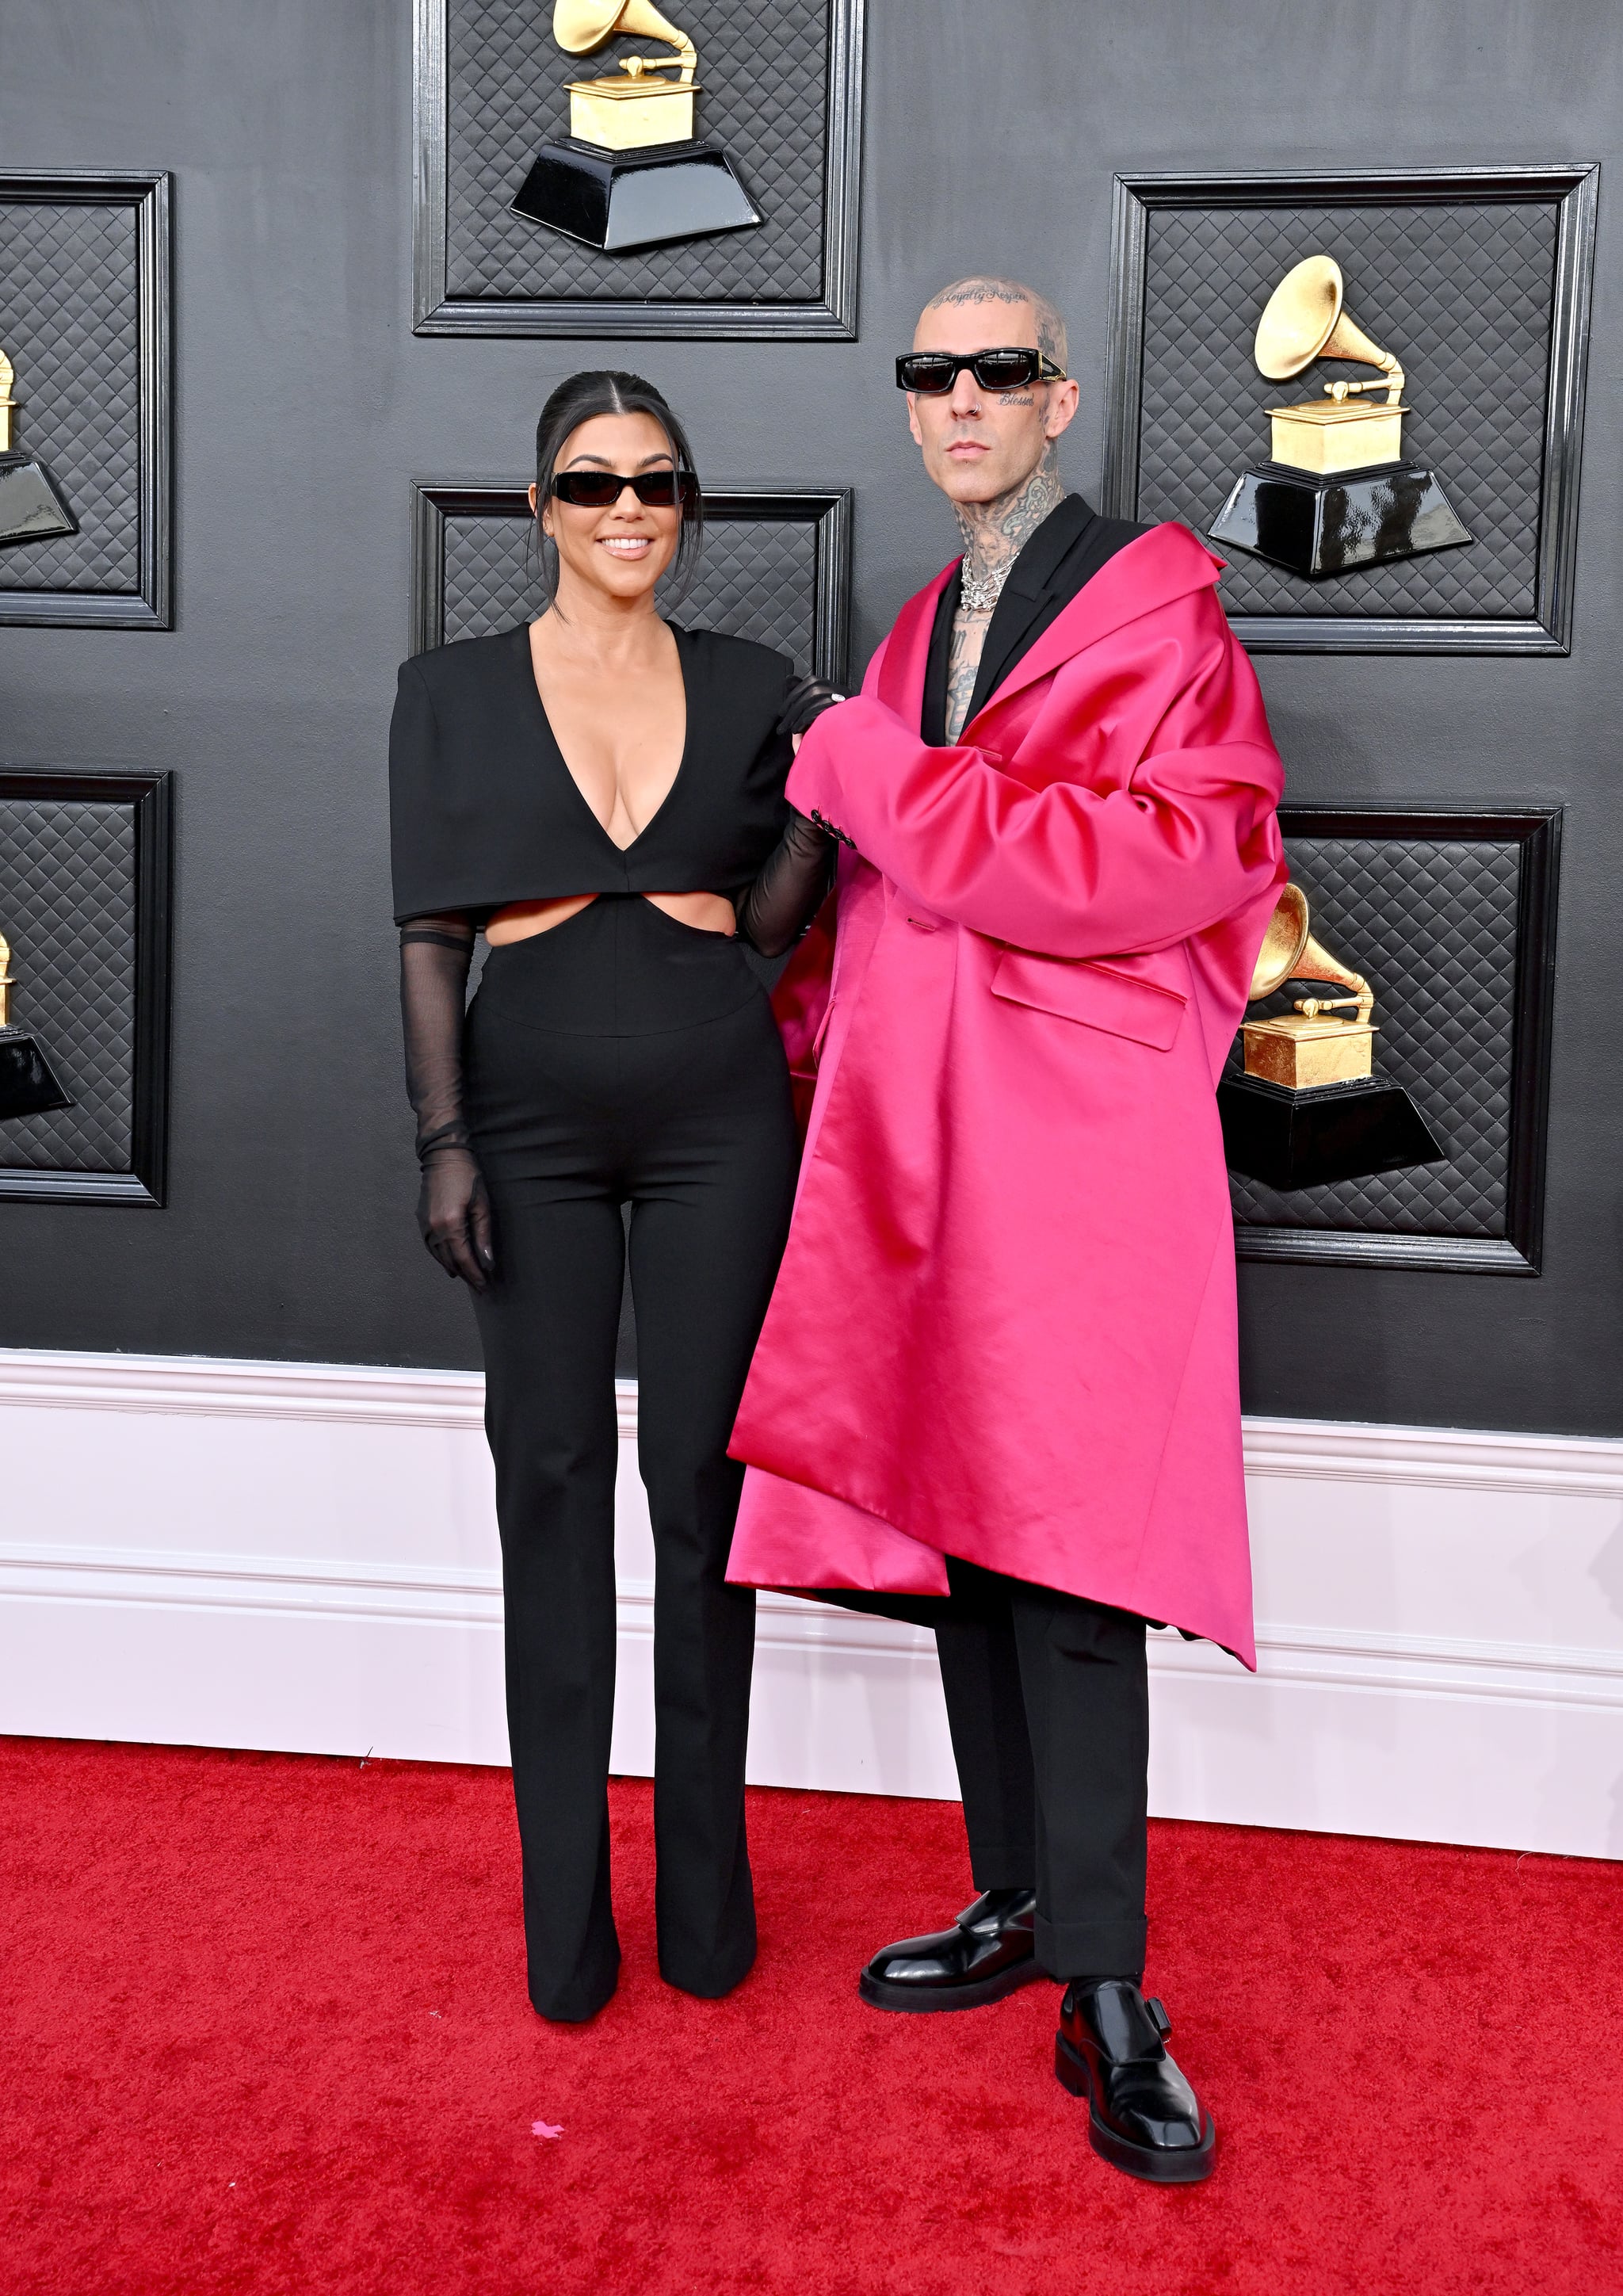 LAS VEGAS, NEVADA - APRIL 03: Kourtney Kardashian and Travis Barker attend the 64th Annual GRAMMY Awards at MGM Grand Garden Arena on April 03, 2022 in Las Vegas, Nevada. (Photo by Axelle/Bauer-Griffin/FilmMagic)